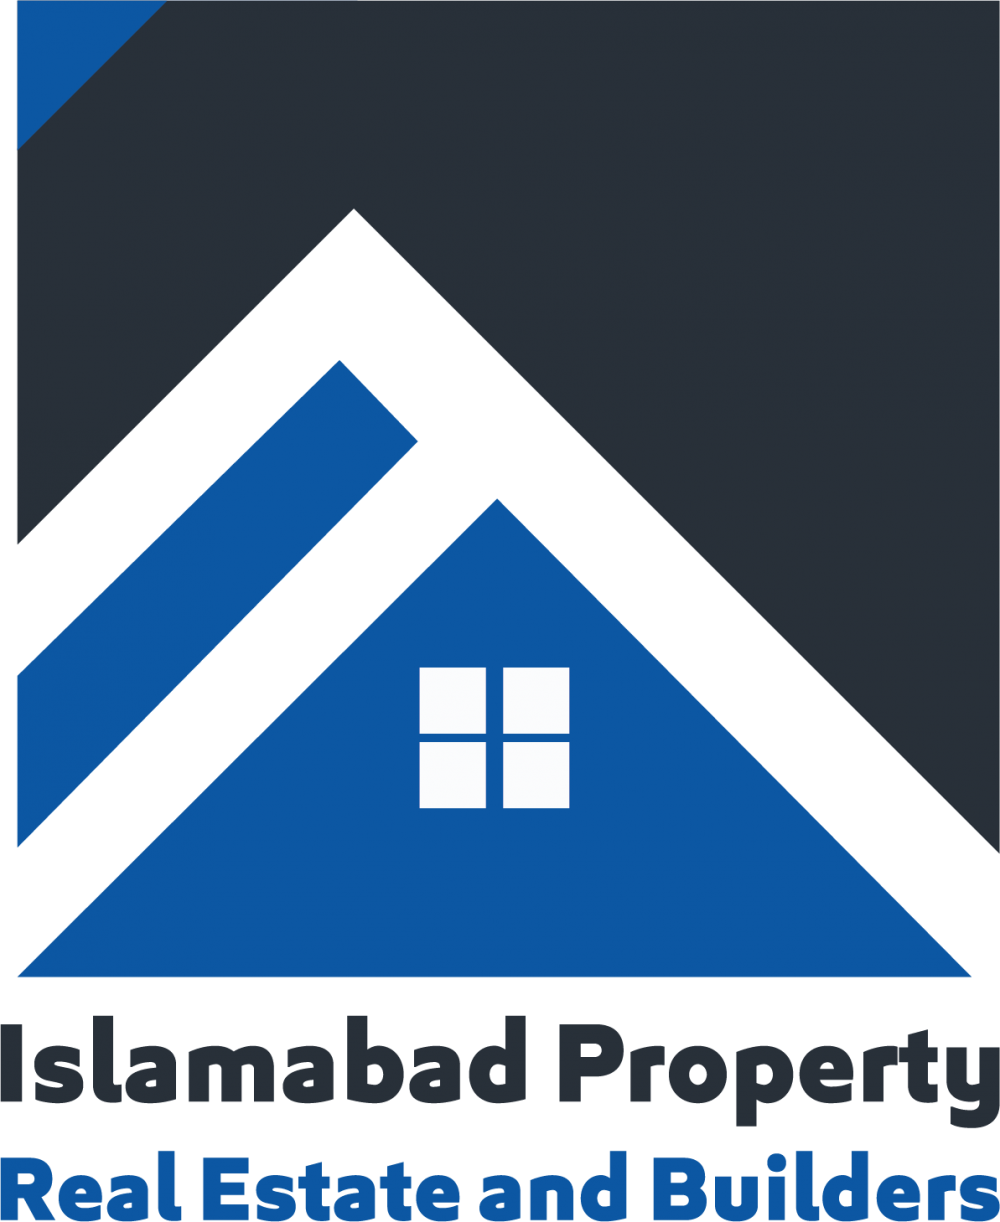 Realestate Agent Abbas Khan   working in Realestate Agency Islamabad Property Real Estate and Builders 